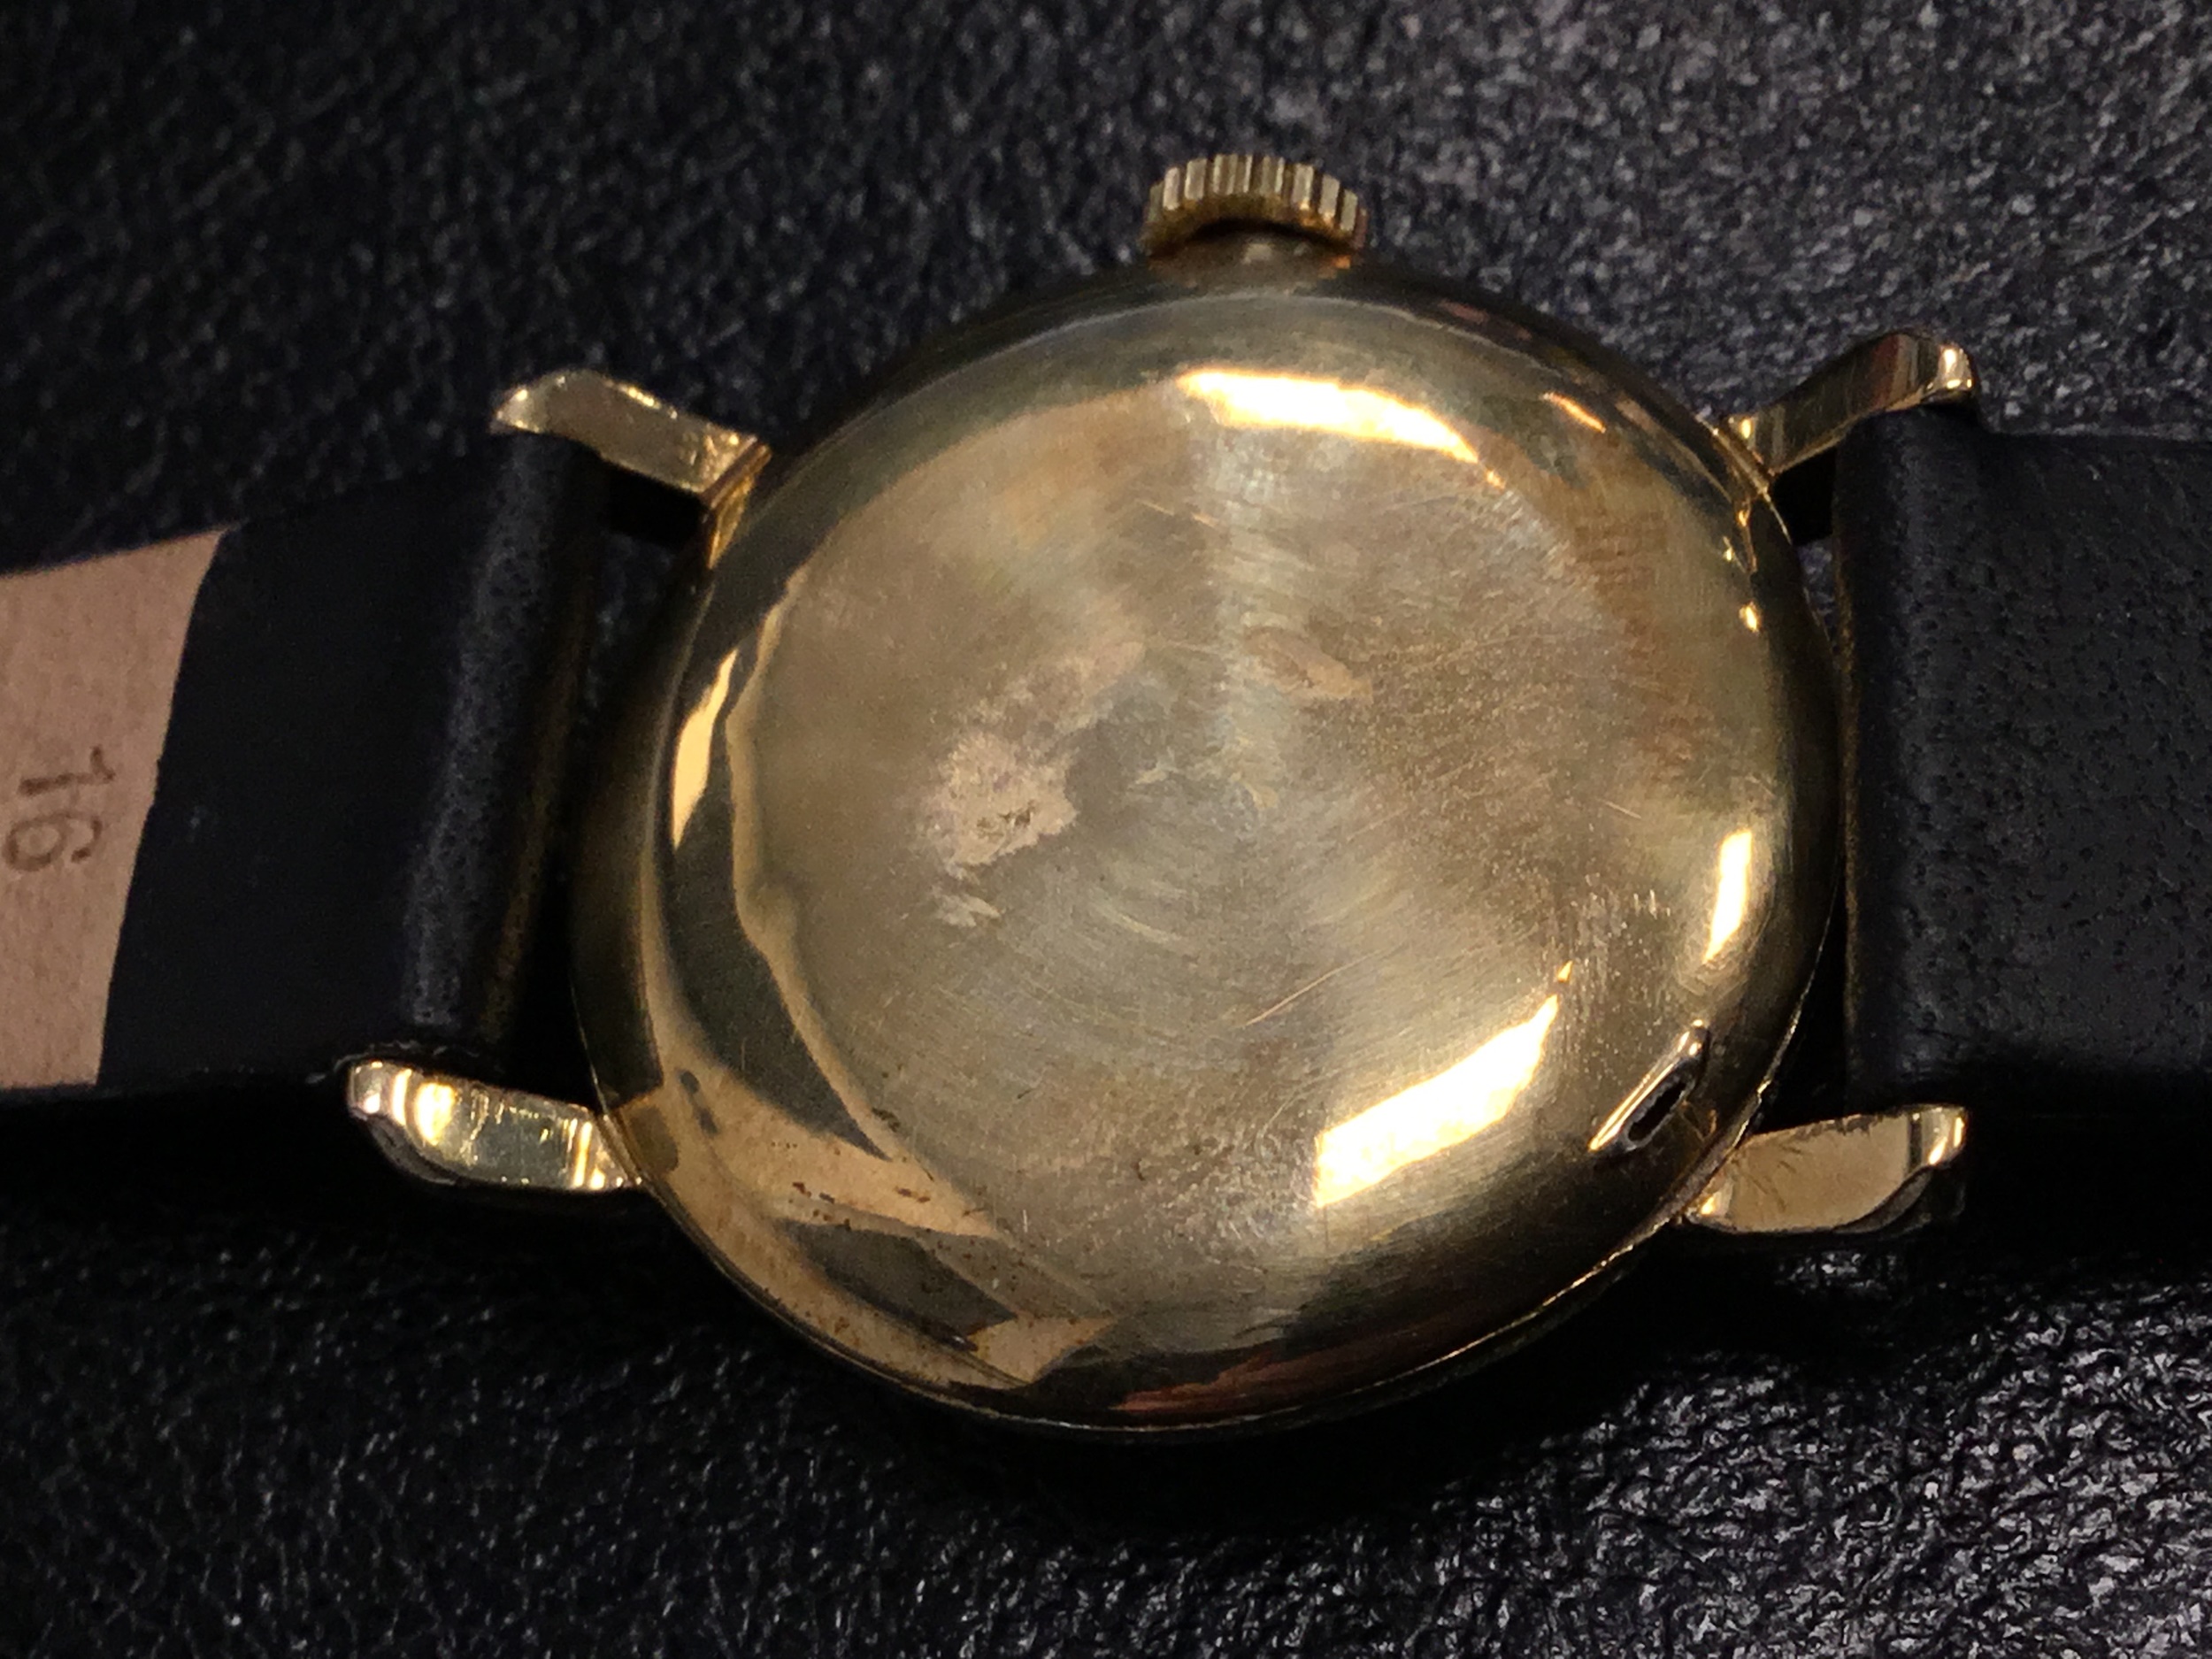 A GENTLEMAN'S LE COULTRE GOLD FILLED MANUAL WIND WRIST WATCH - Image 2 of 2